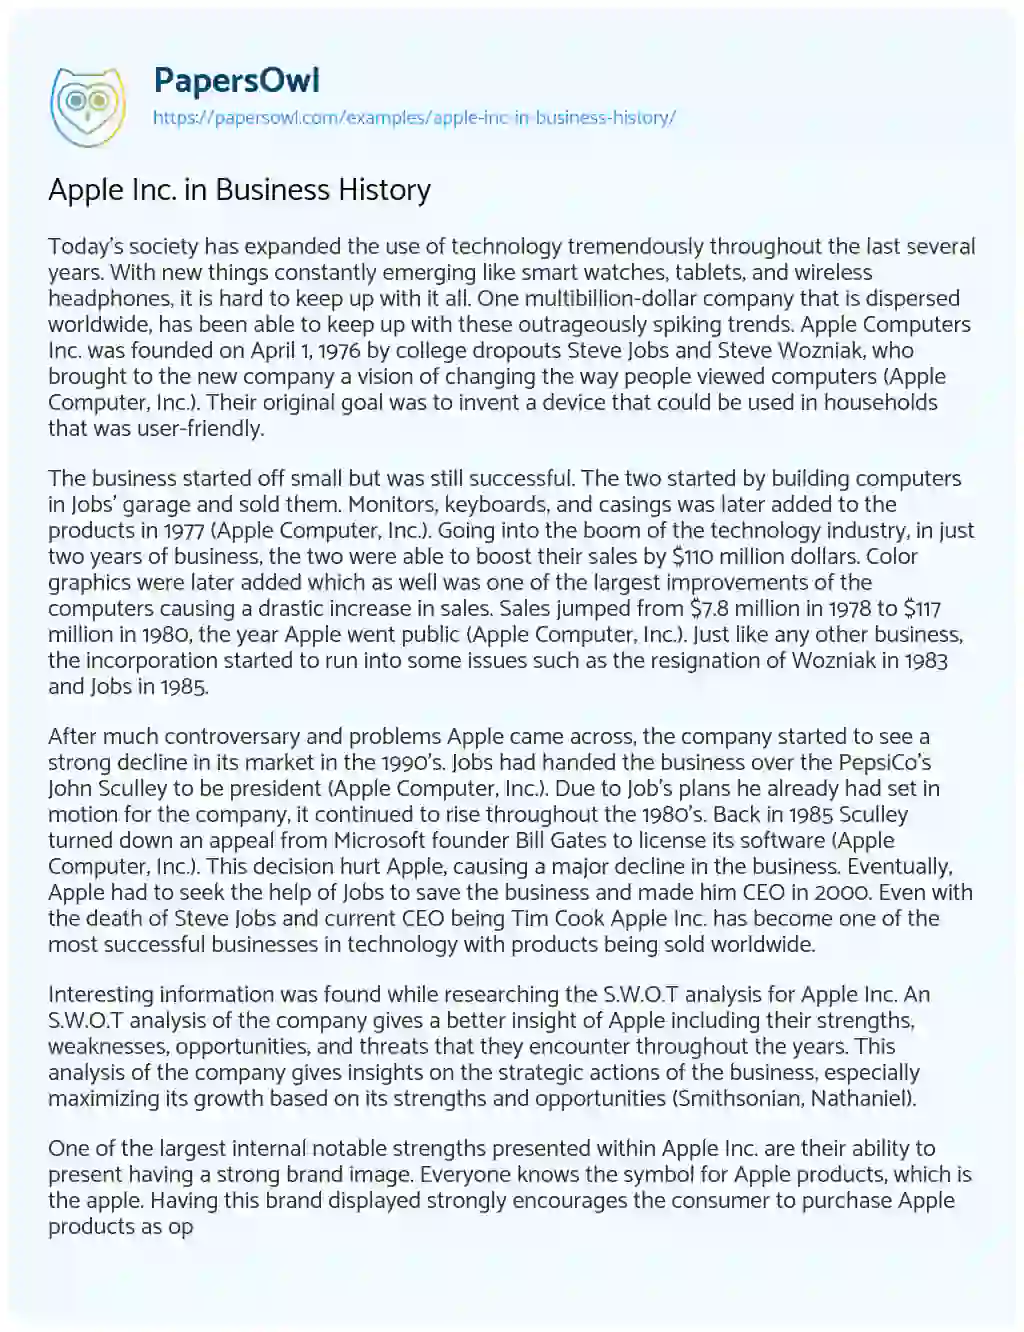 Essay on Apple Inc. in Business History